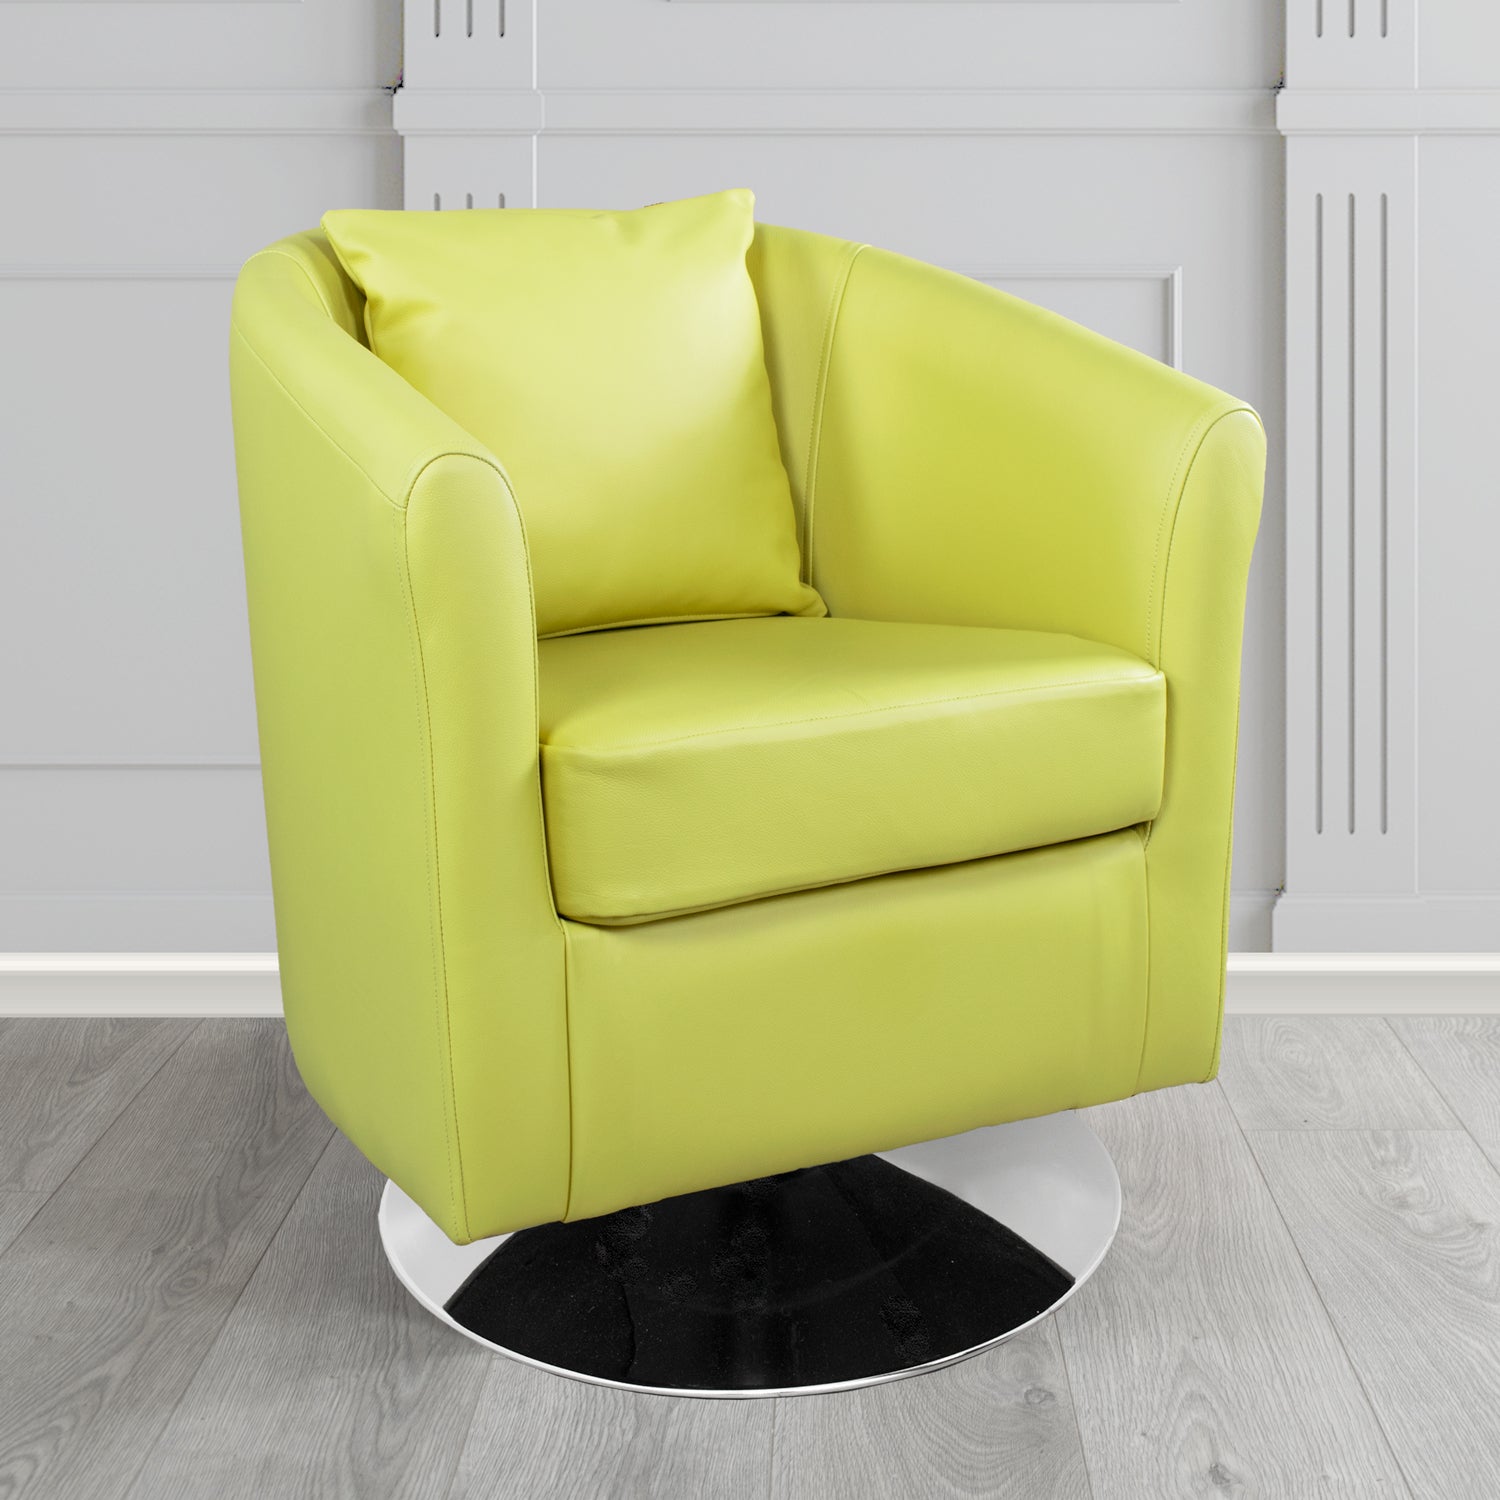 St Tropez Shelly Chartreuse Crib 5 Genuine Leather Swivel Tub Chair (4630112436266)